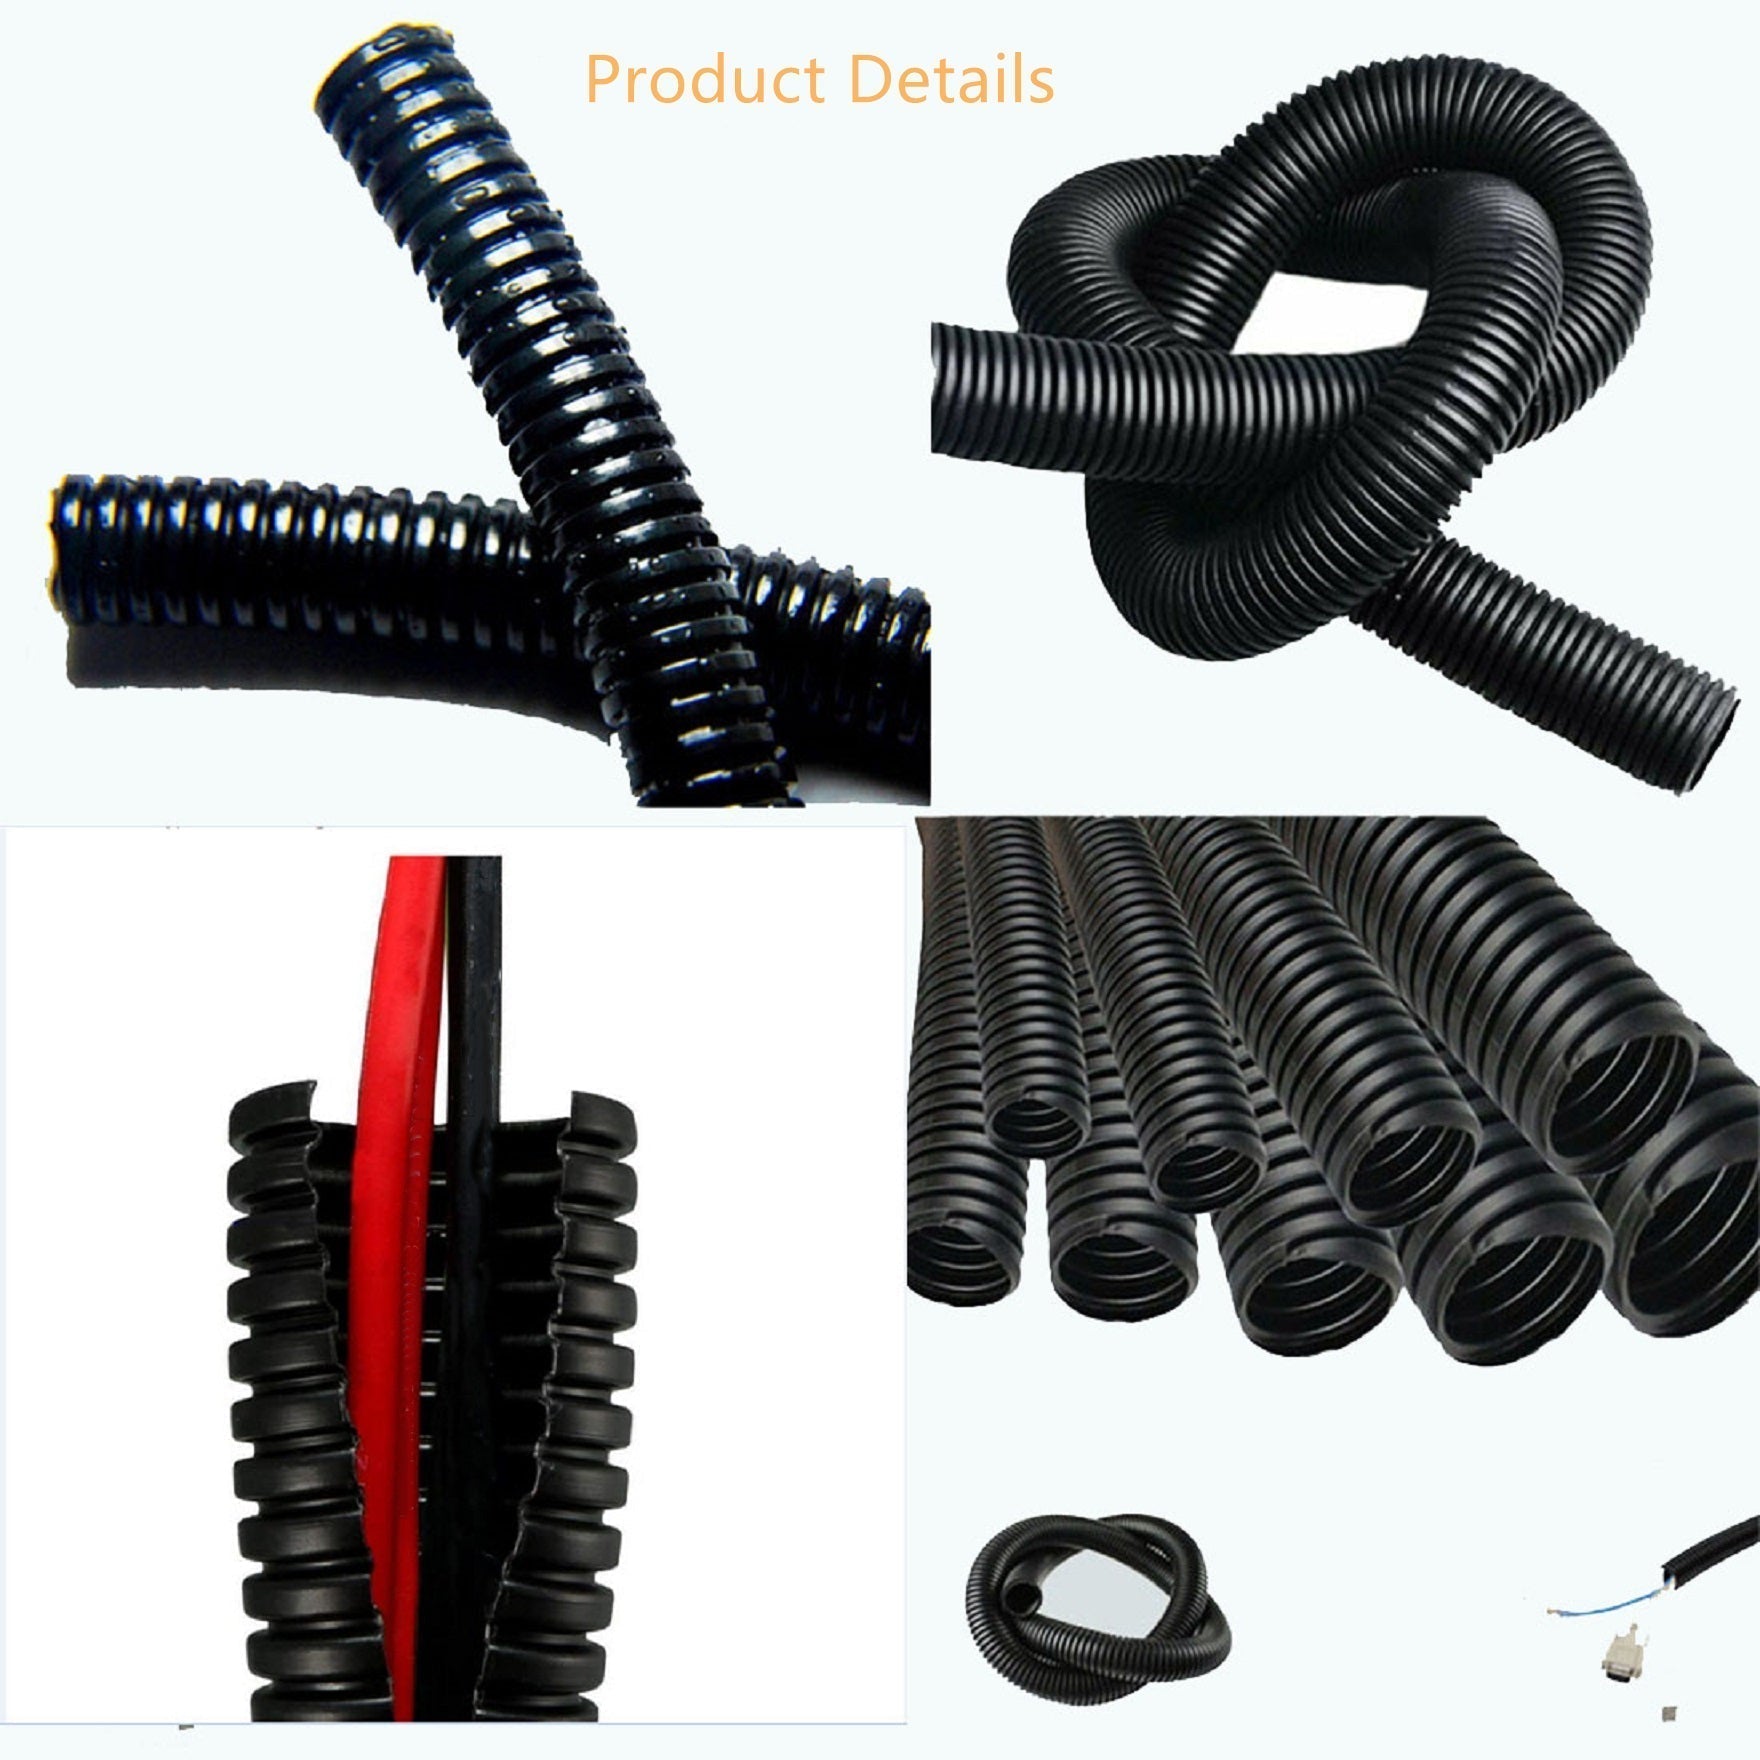 findmall Flex Cable Black Wire Loom Tube Corrugated Conduit Choose Hot Sizes Sleeve FINDMALLPARTS